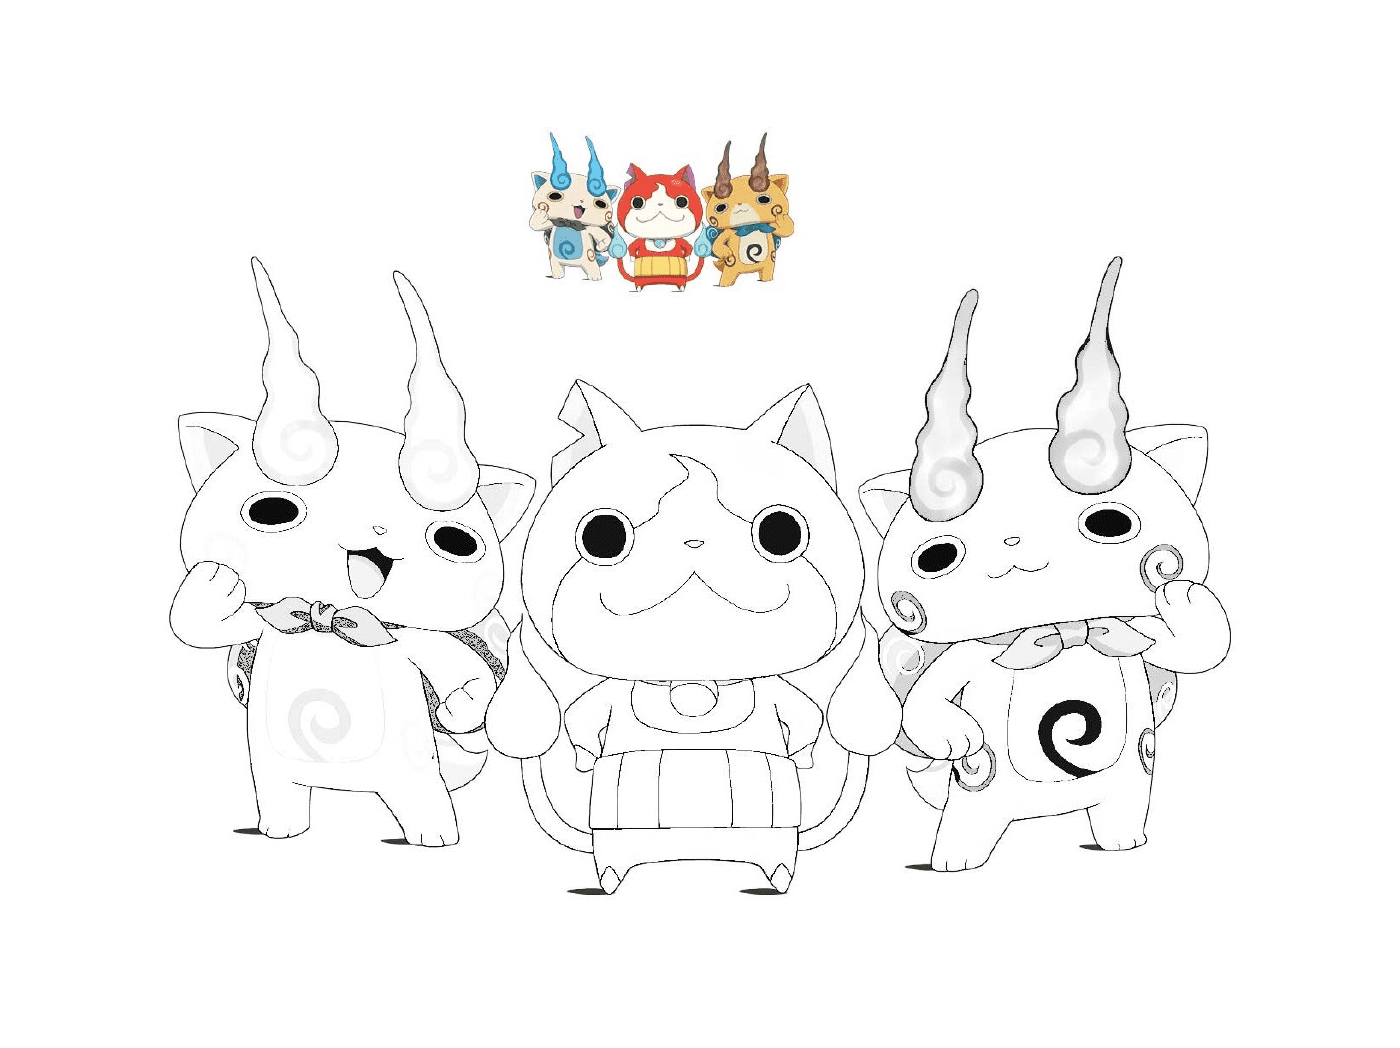  Group of cats with horns online 